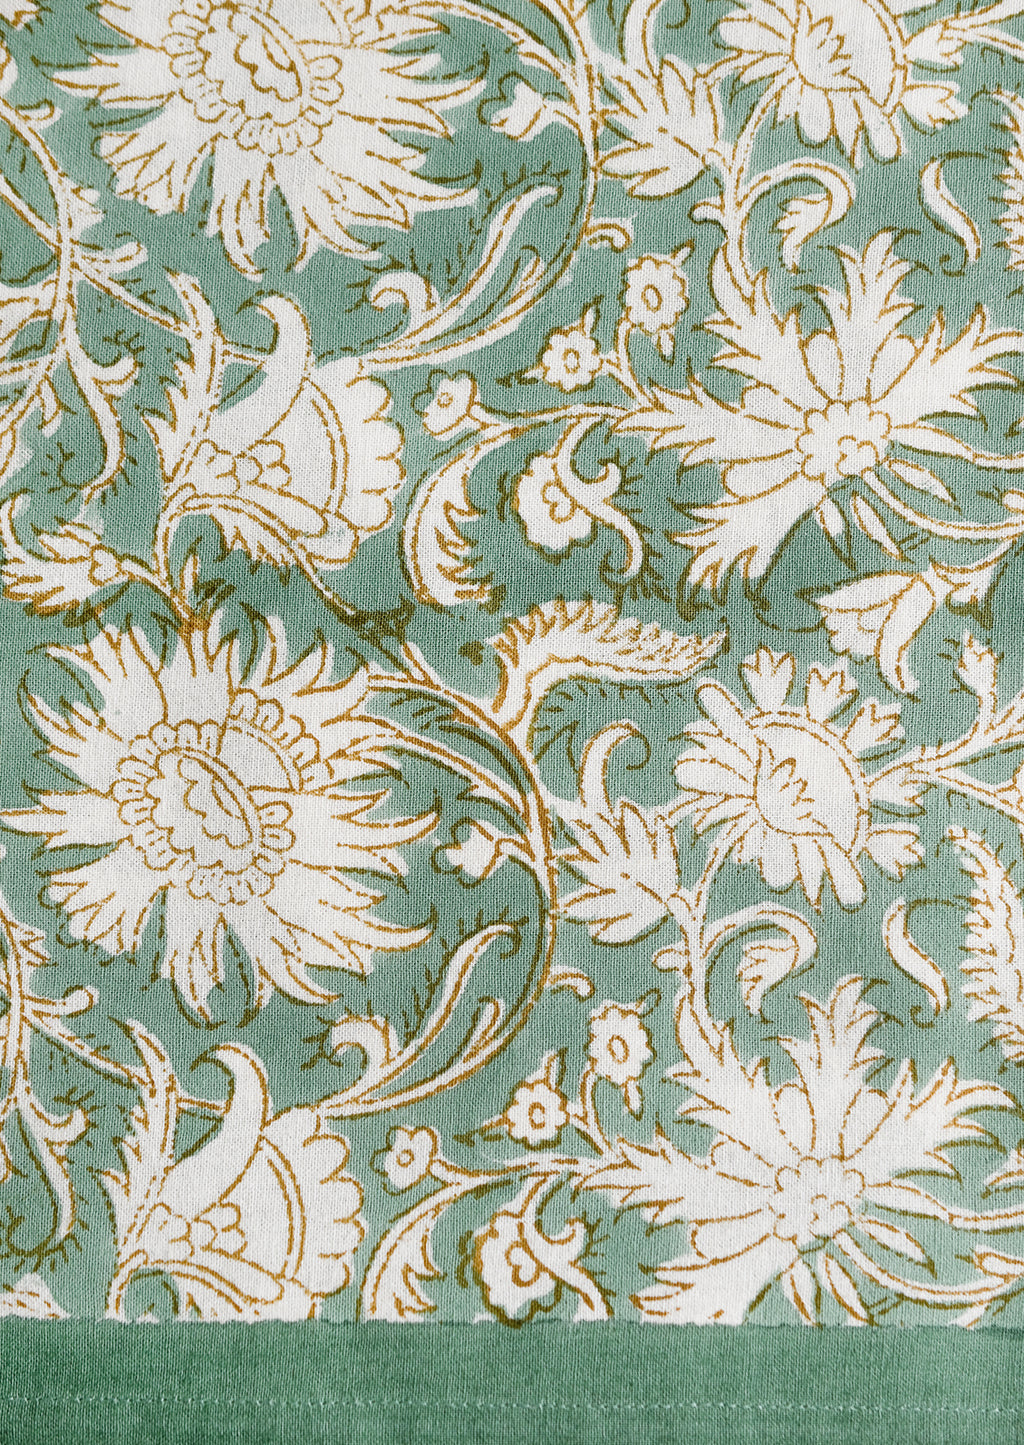 5: A block print tablecloth in sea green with white and brown floral print.